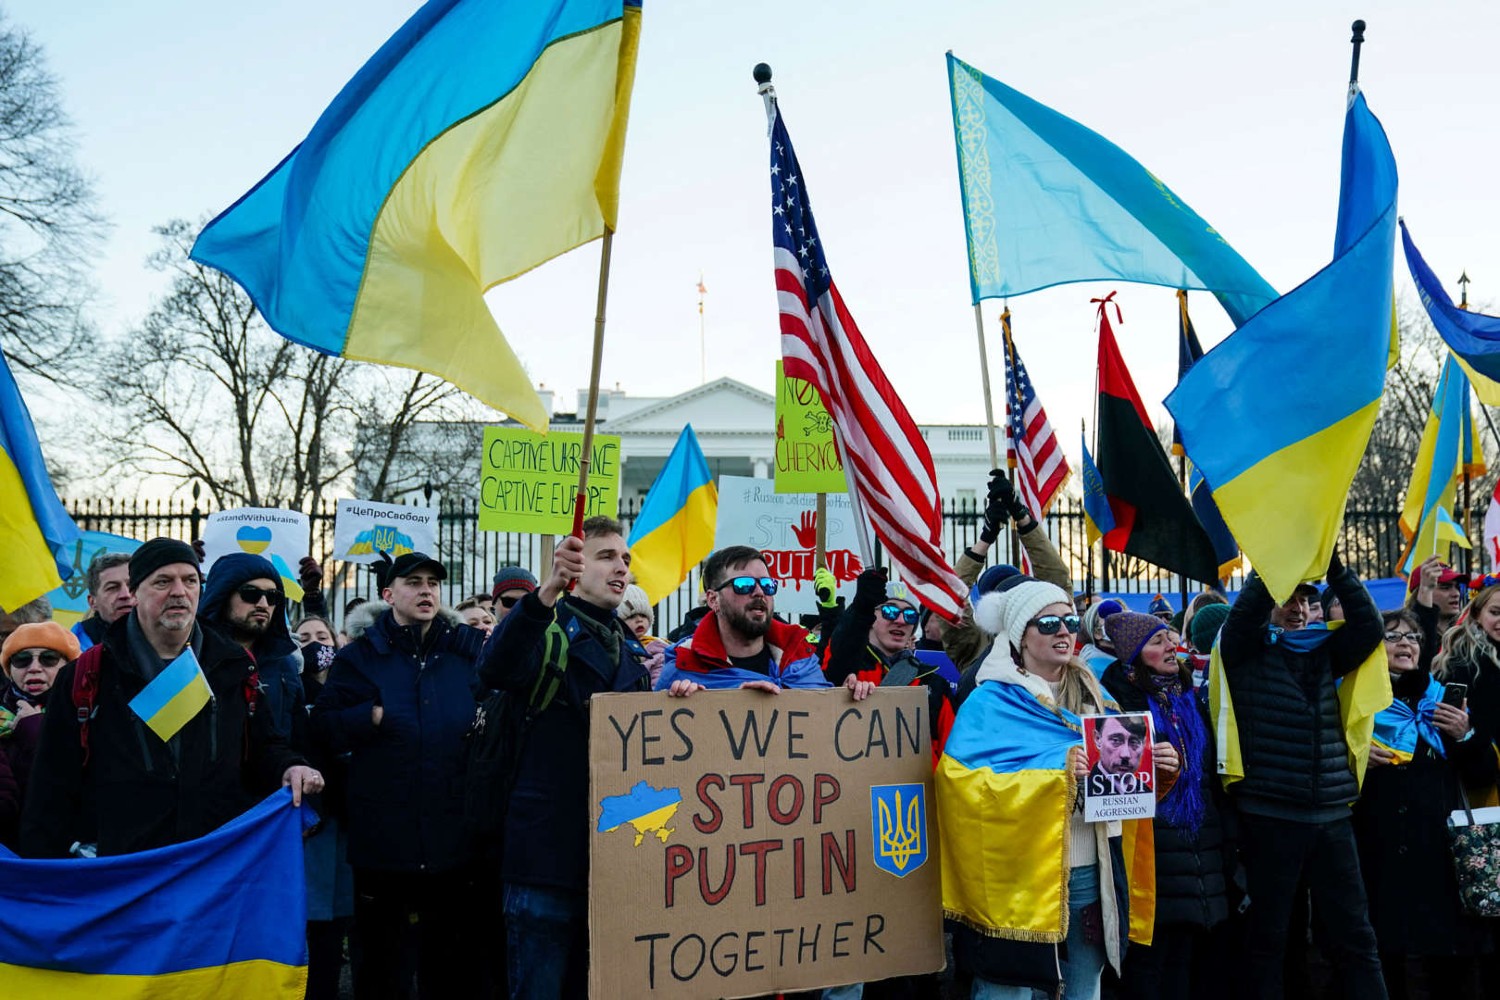 Demonstrators participate in the "Stand with Ukraine" rally in Lafayette Square near the White House in Washington, February 20, 2022. REUTERS / Sarah Silbiger